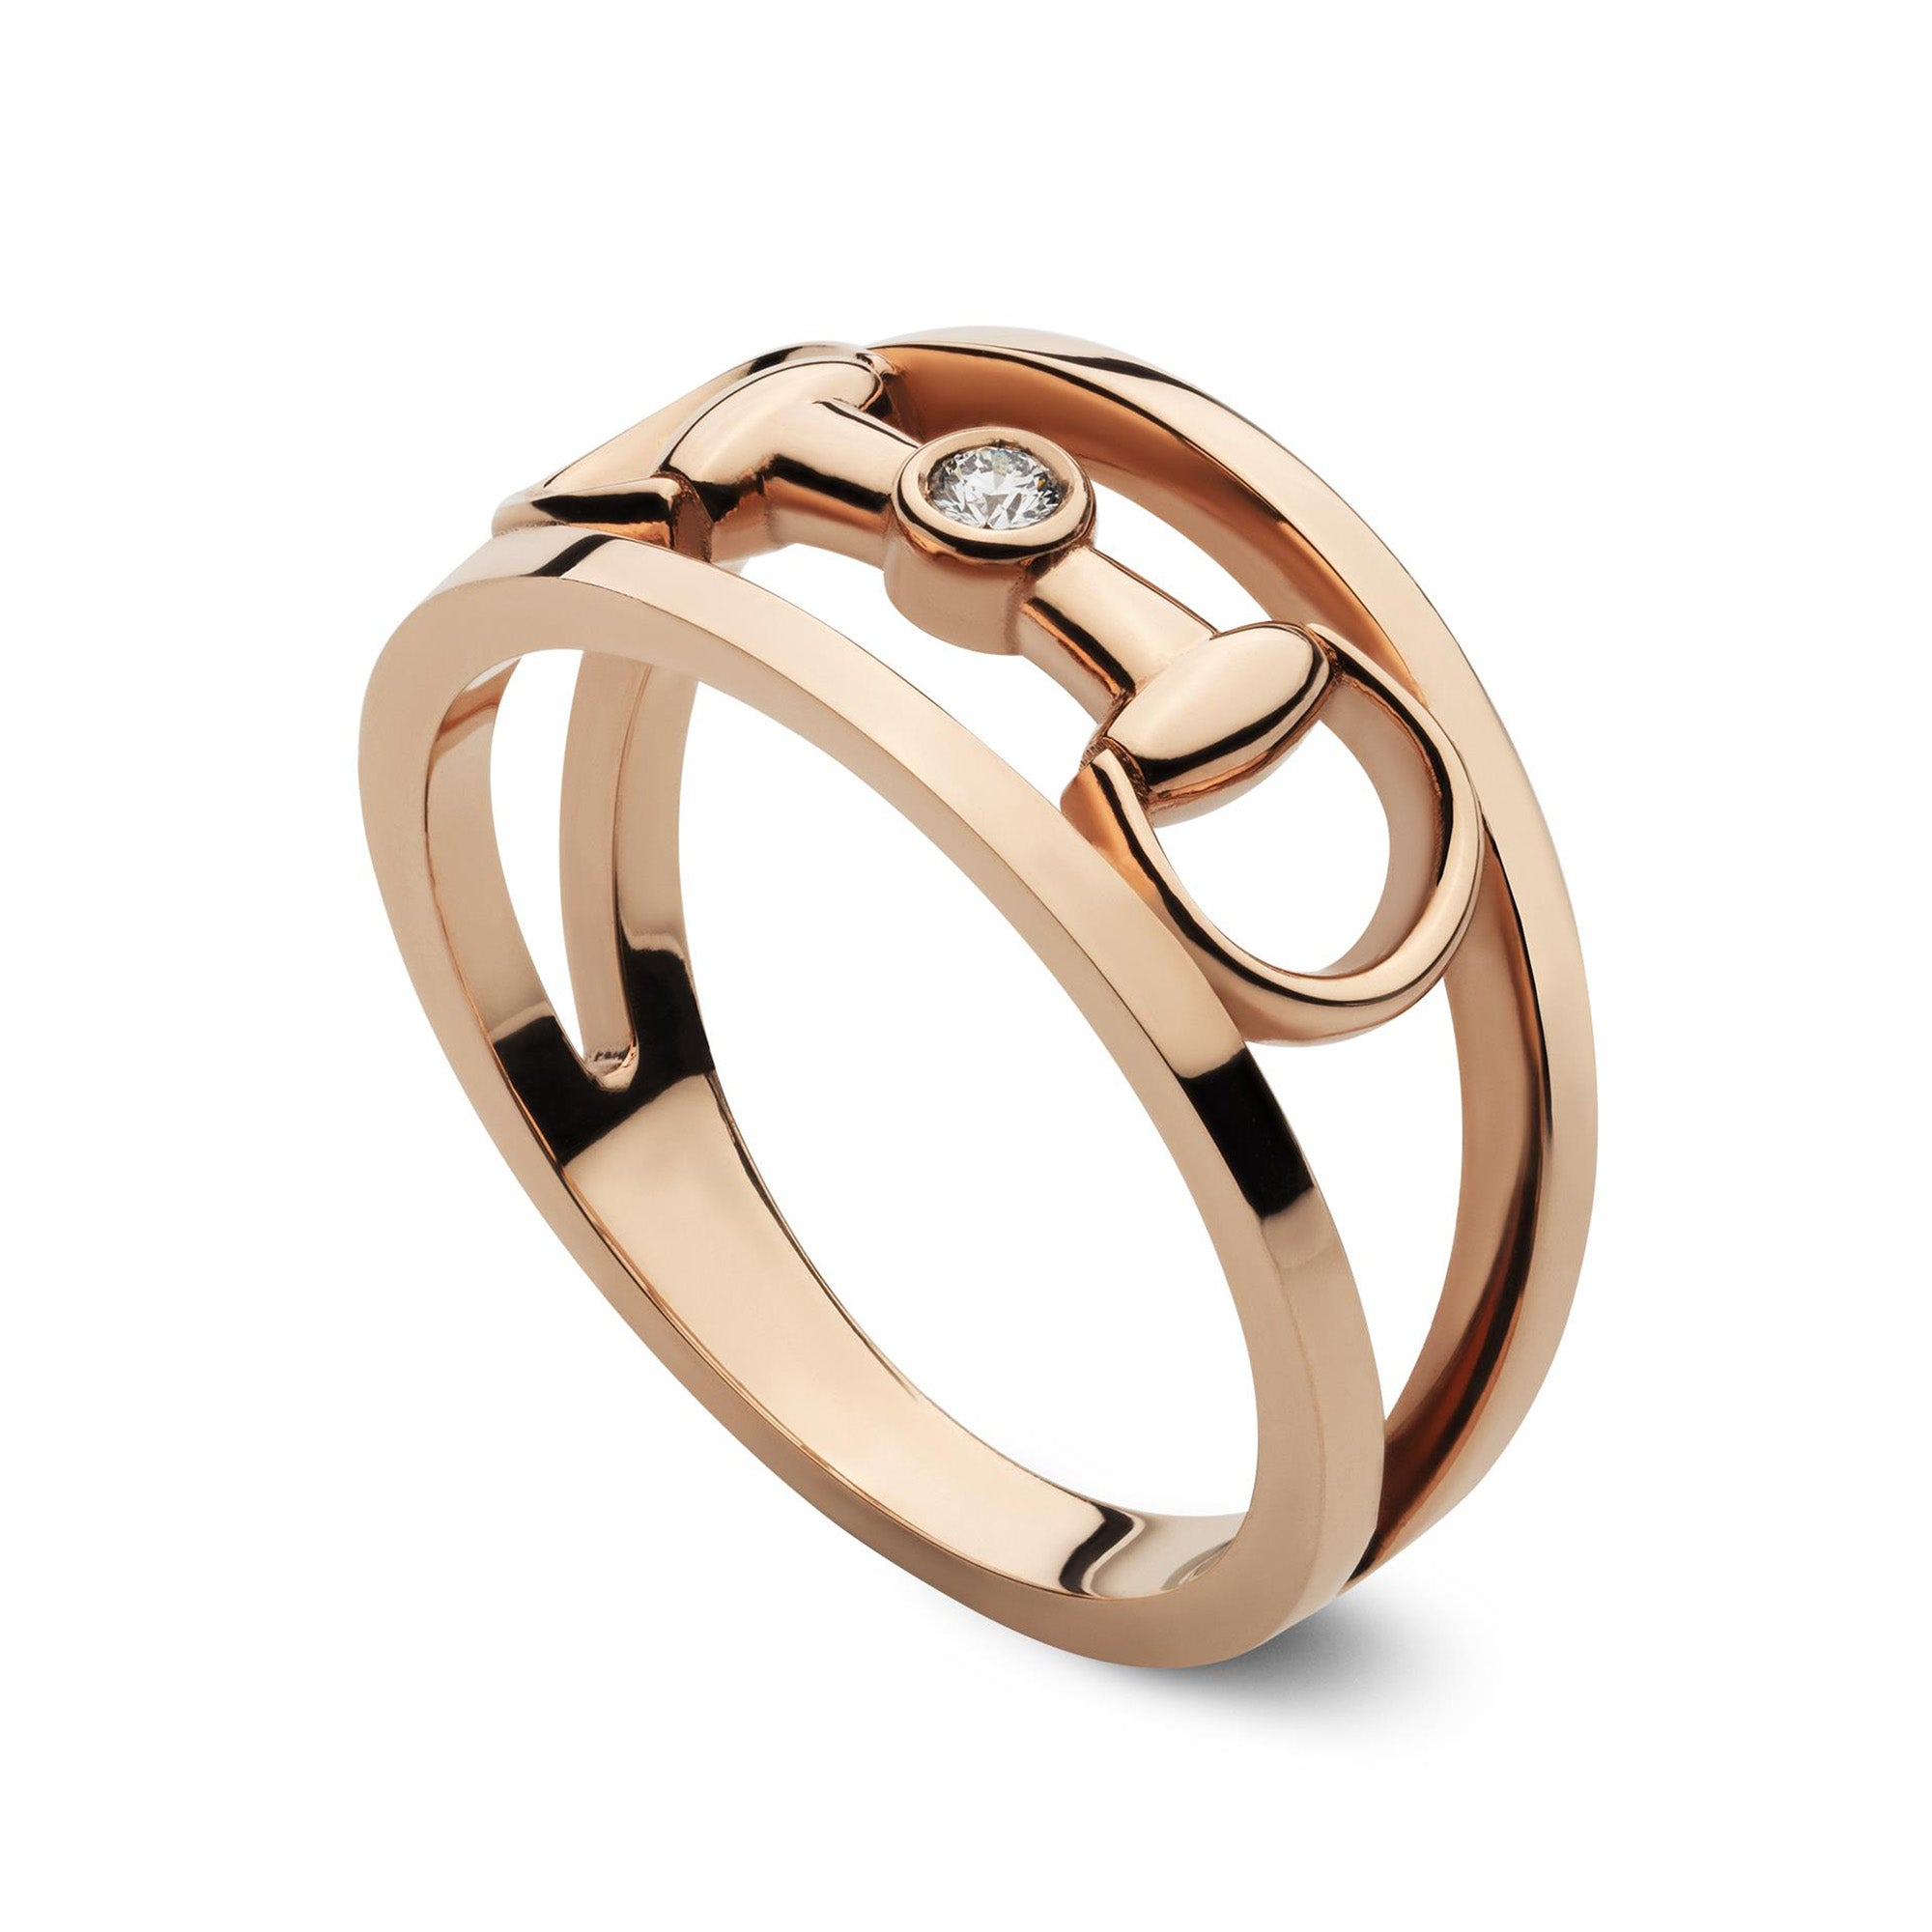 Gucci Horsebit 18ct Rose Gold And Diamond Wide Dress Ring